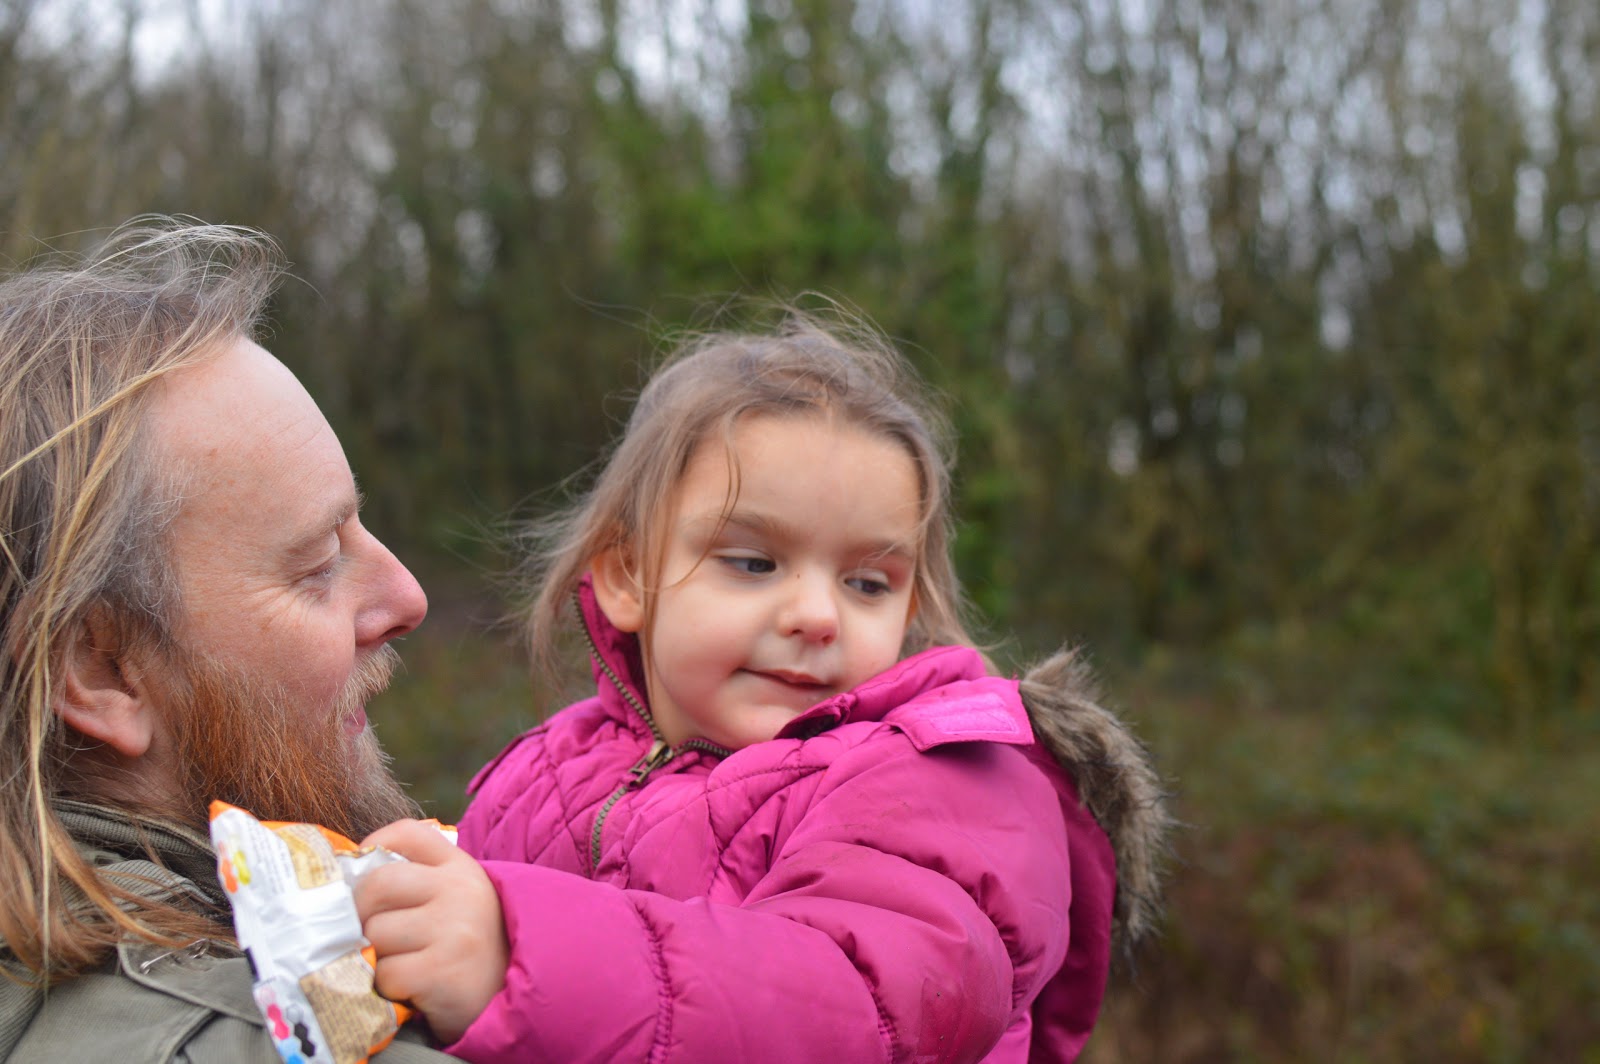 , Days Out:  Llys y Fran, Country Park and Reservoir Pembrokeshire